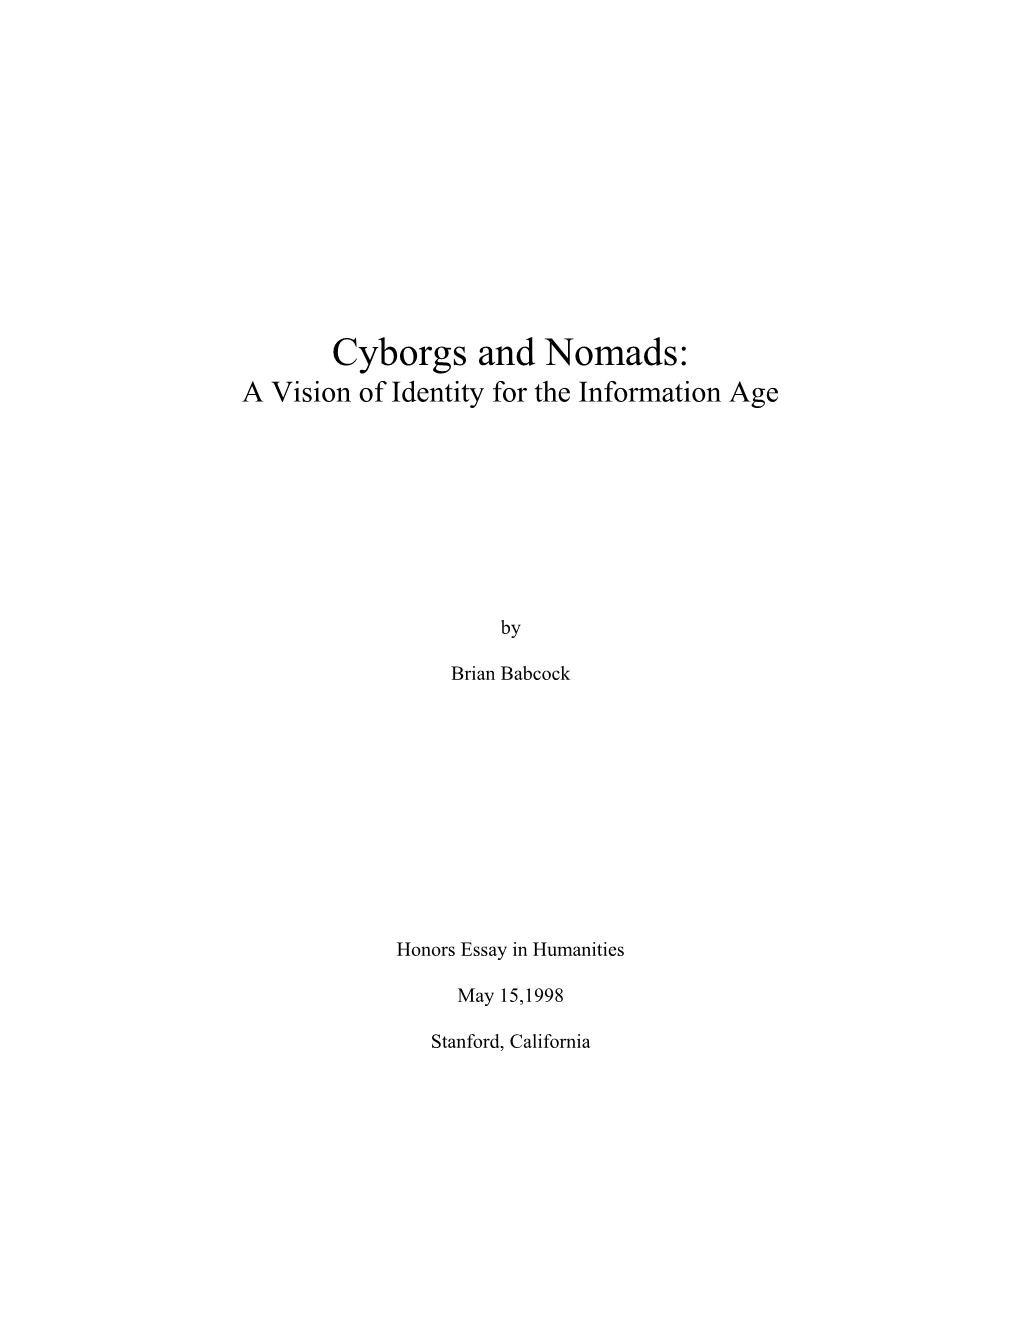 Cyborgs and Nomads